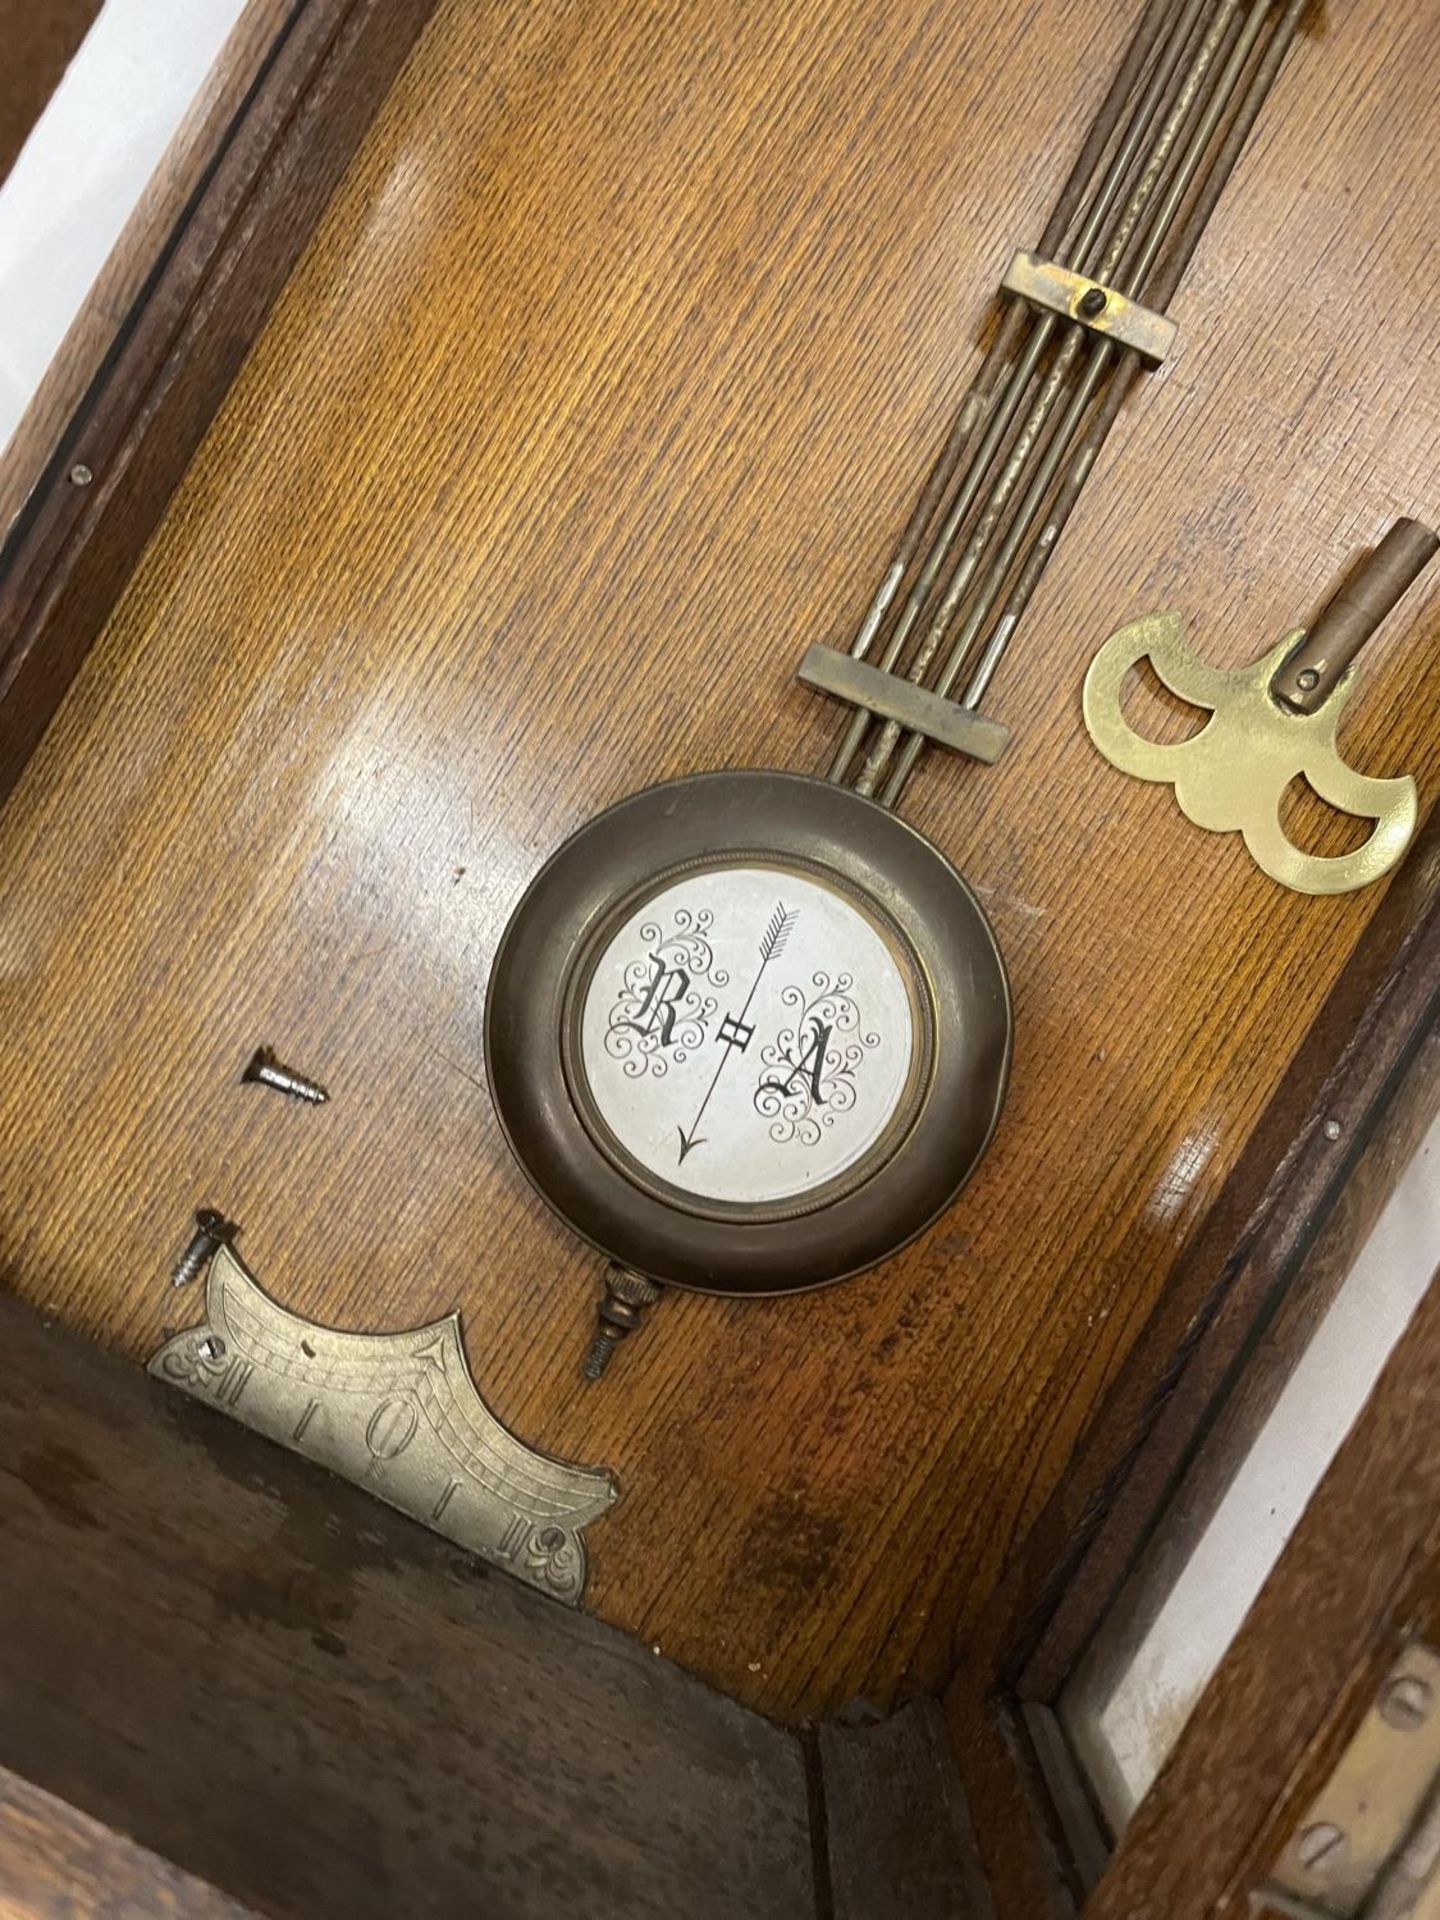 A OAK CASED VIENNA WALL CLOCK - Image 3 of 5